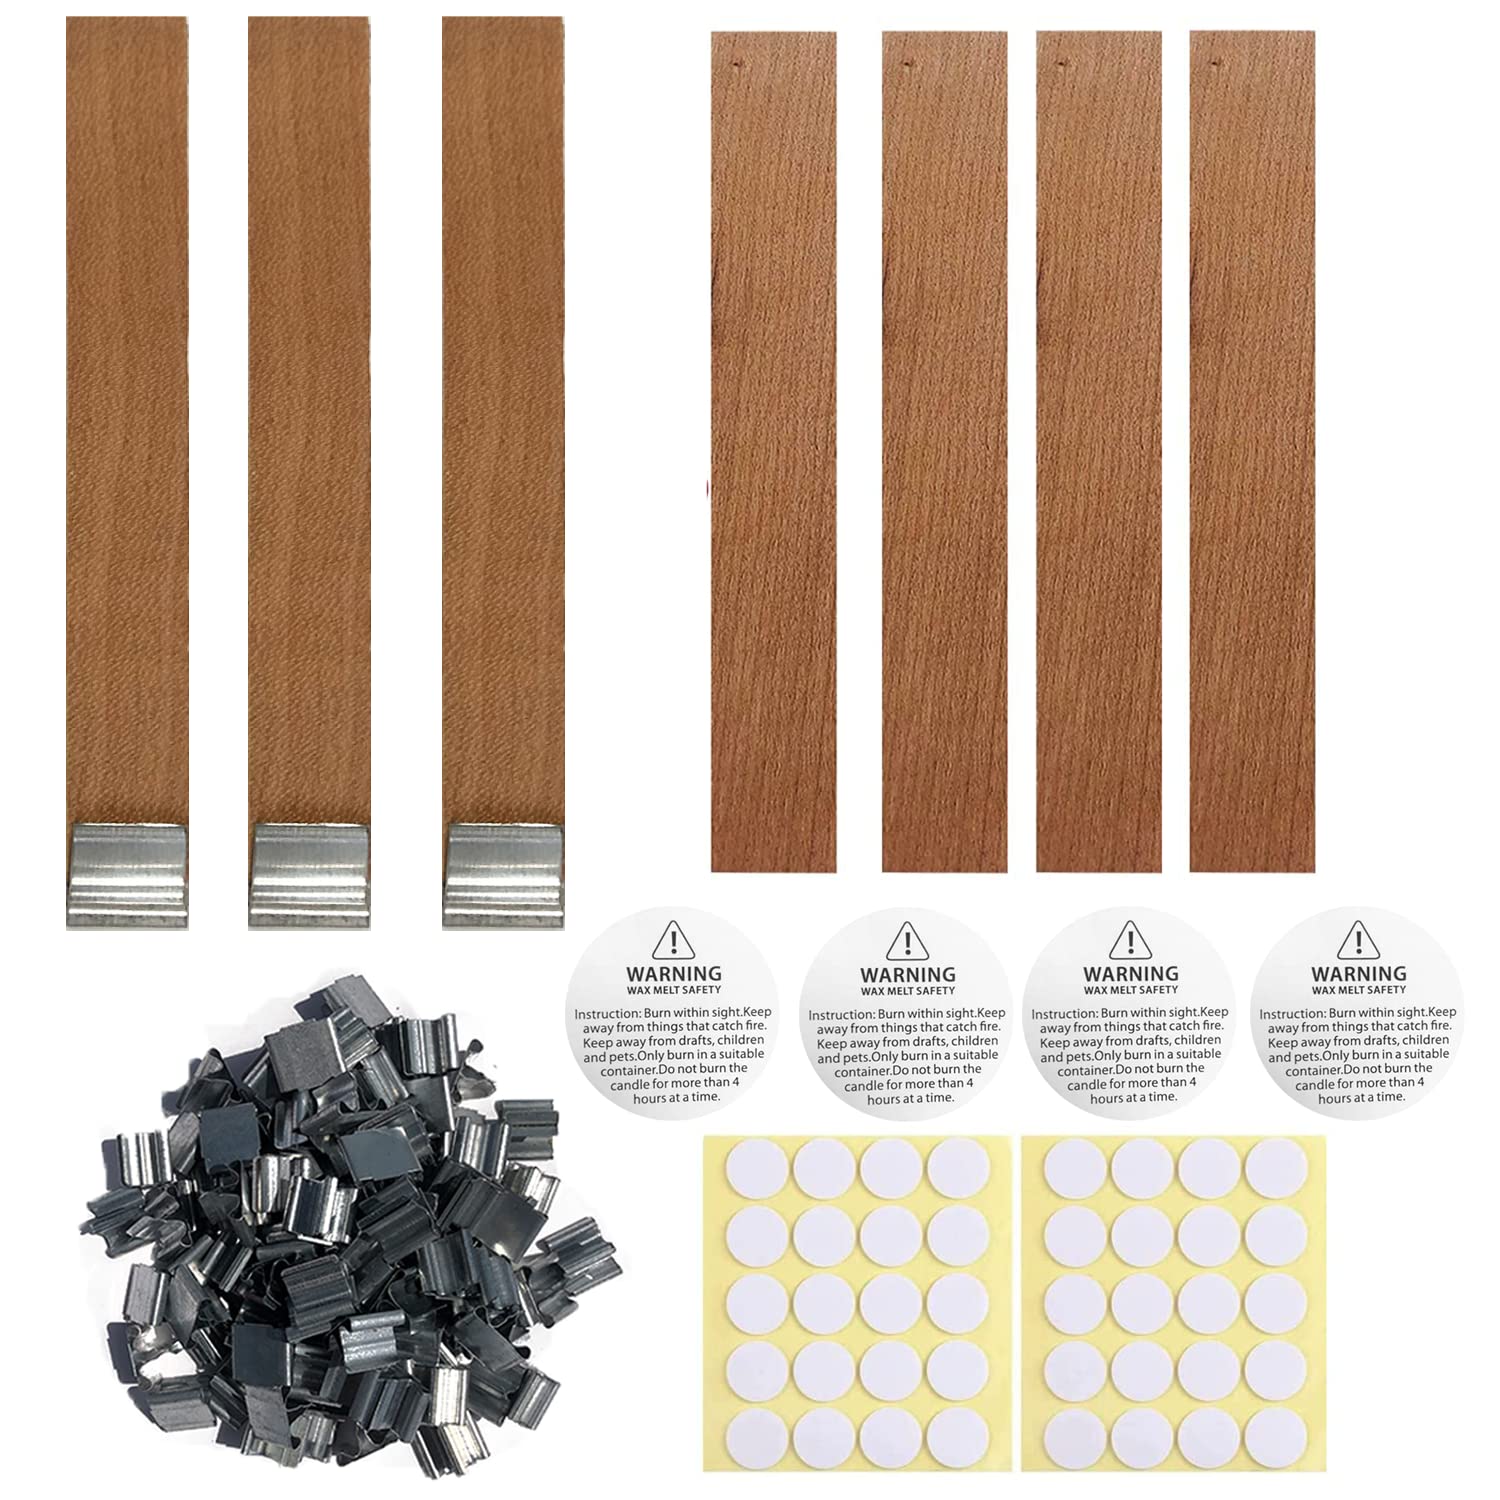 Candle Wick Kit, 150pcs Candle Wicks, Candle Wick Stickers 150pcs and  Candle Wick Centering Device 1 pcs, Candle Making Supplies for Candle  Making